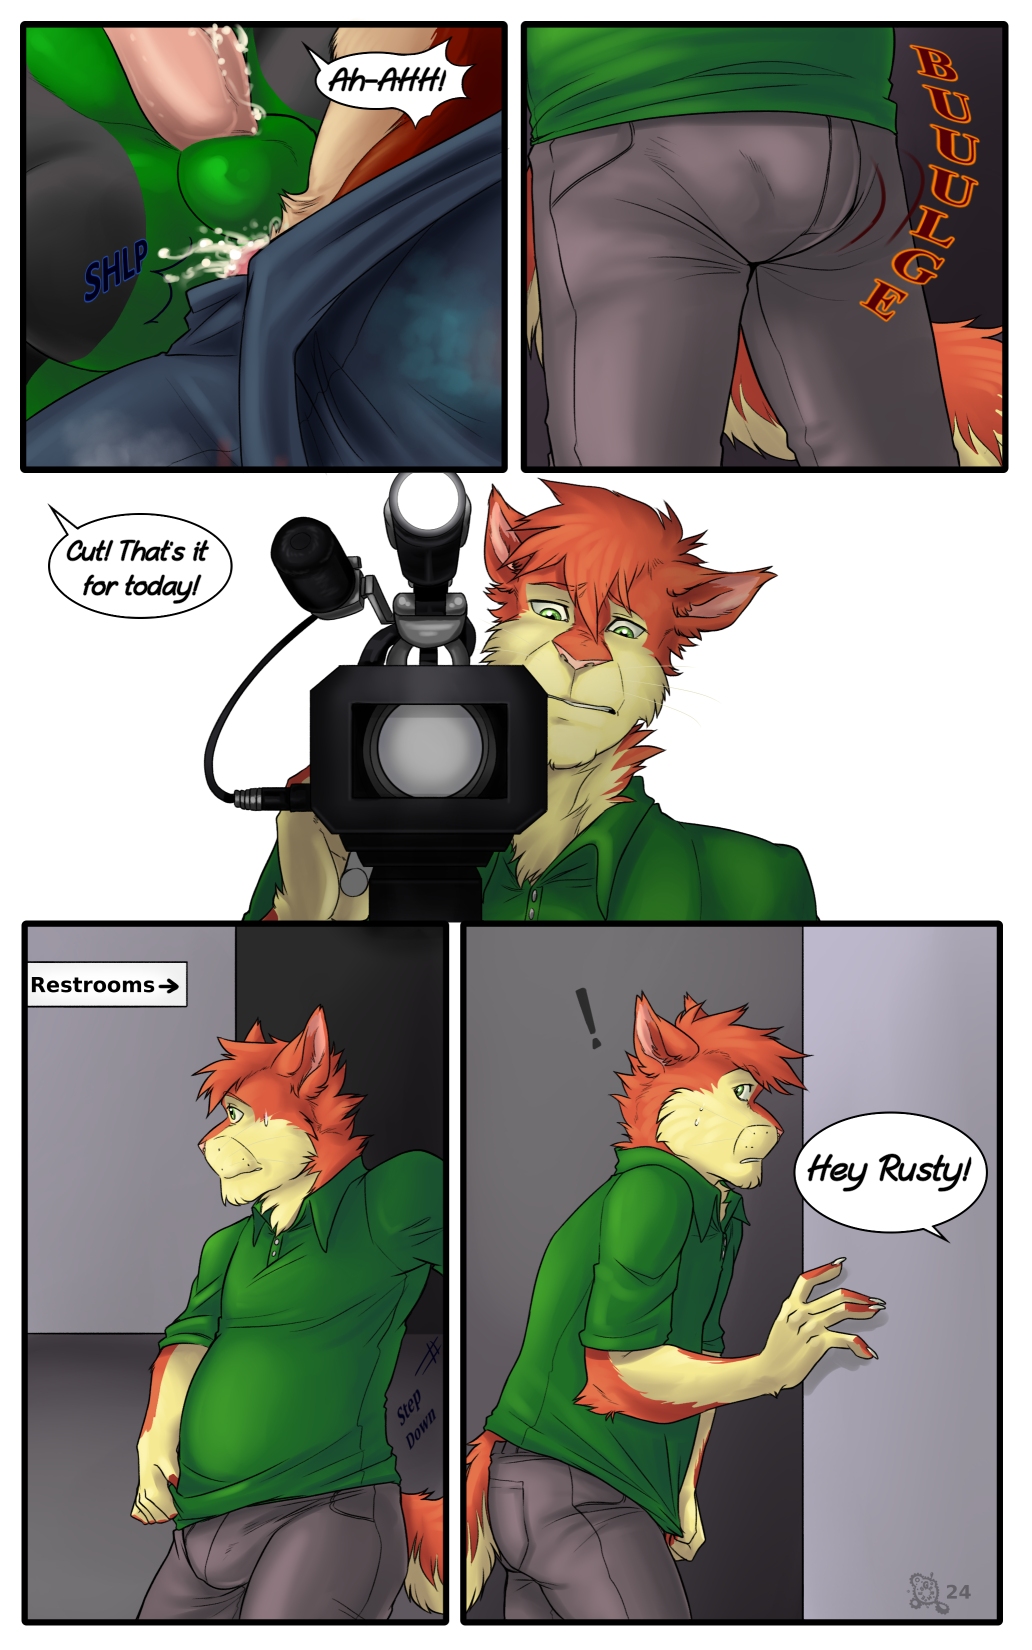 Behind The Lens Chapter 2 page 24